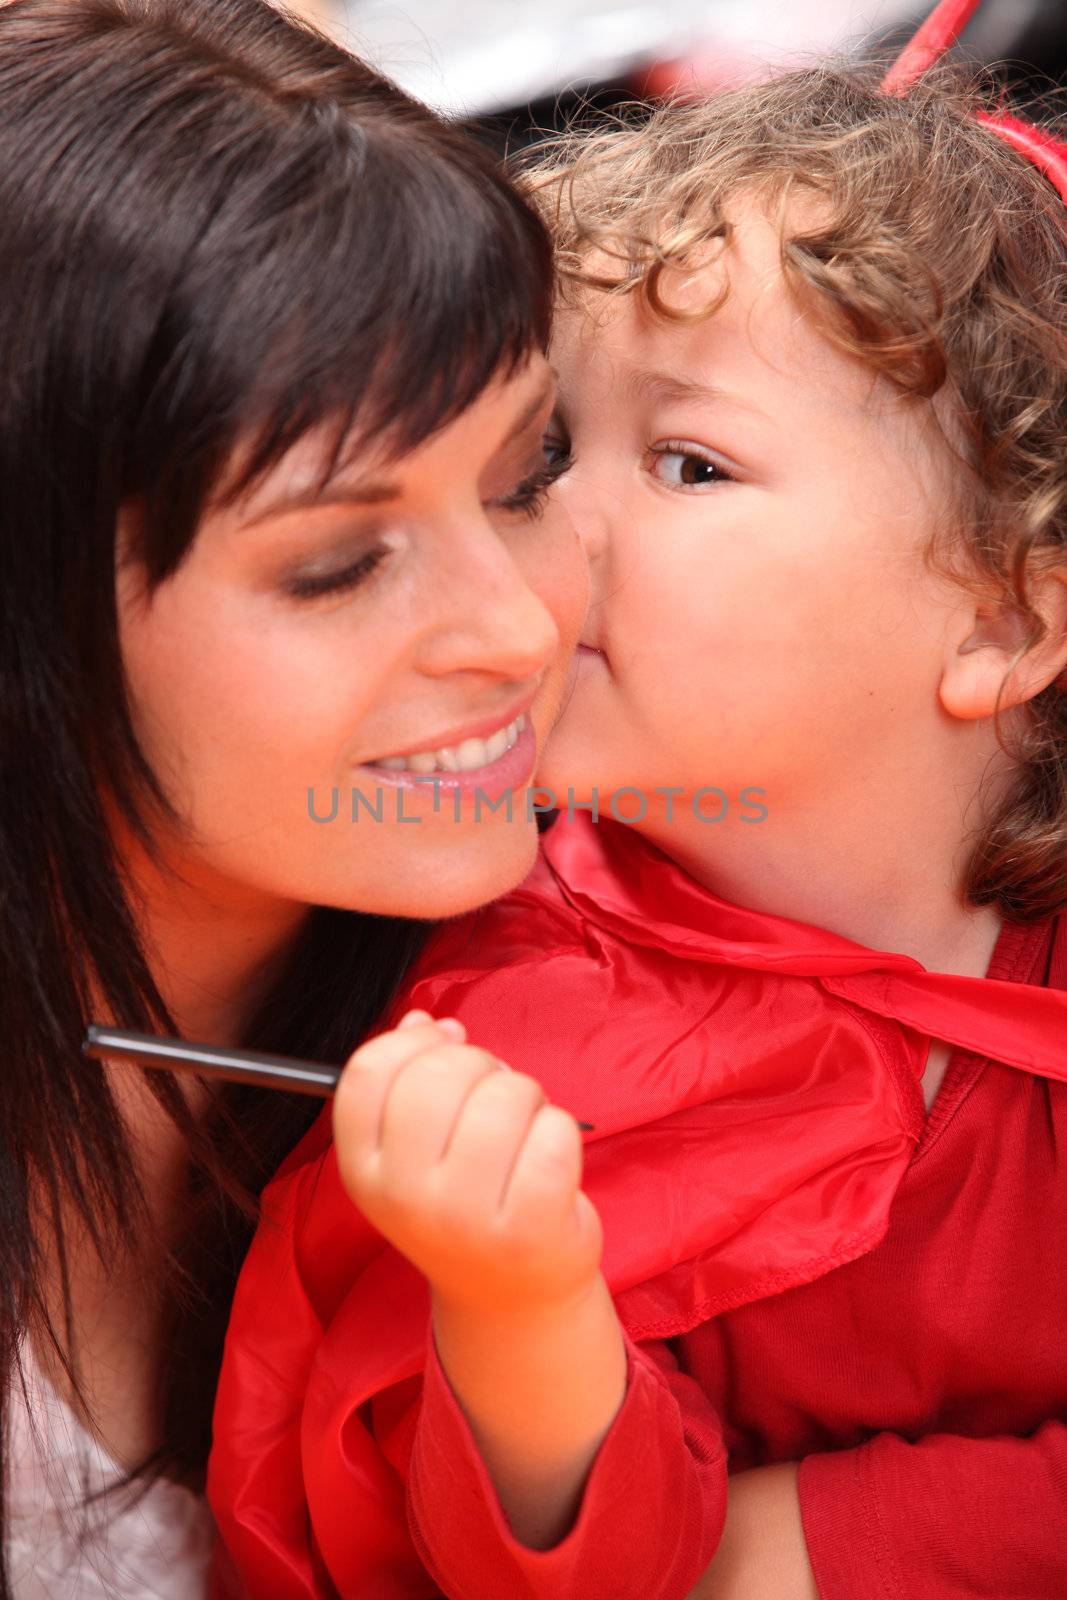 Child whispering into her mother's ear